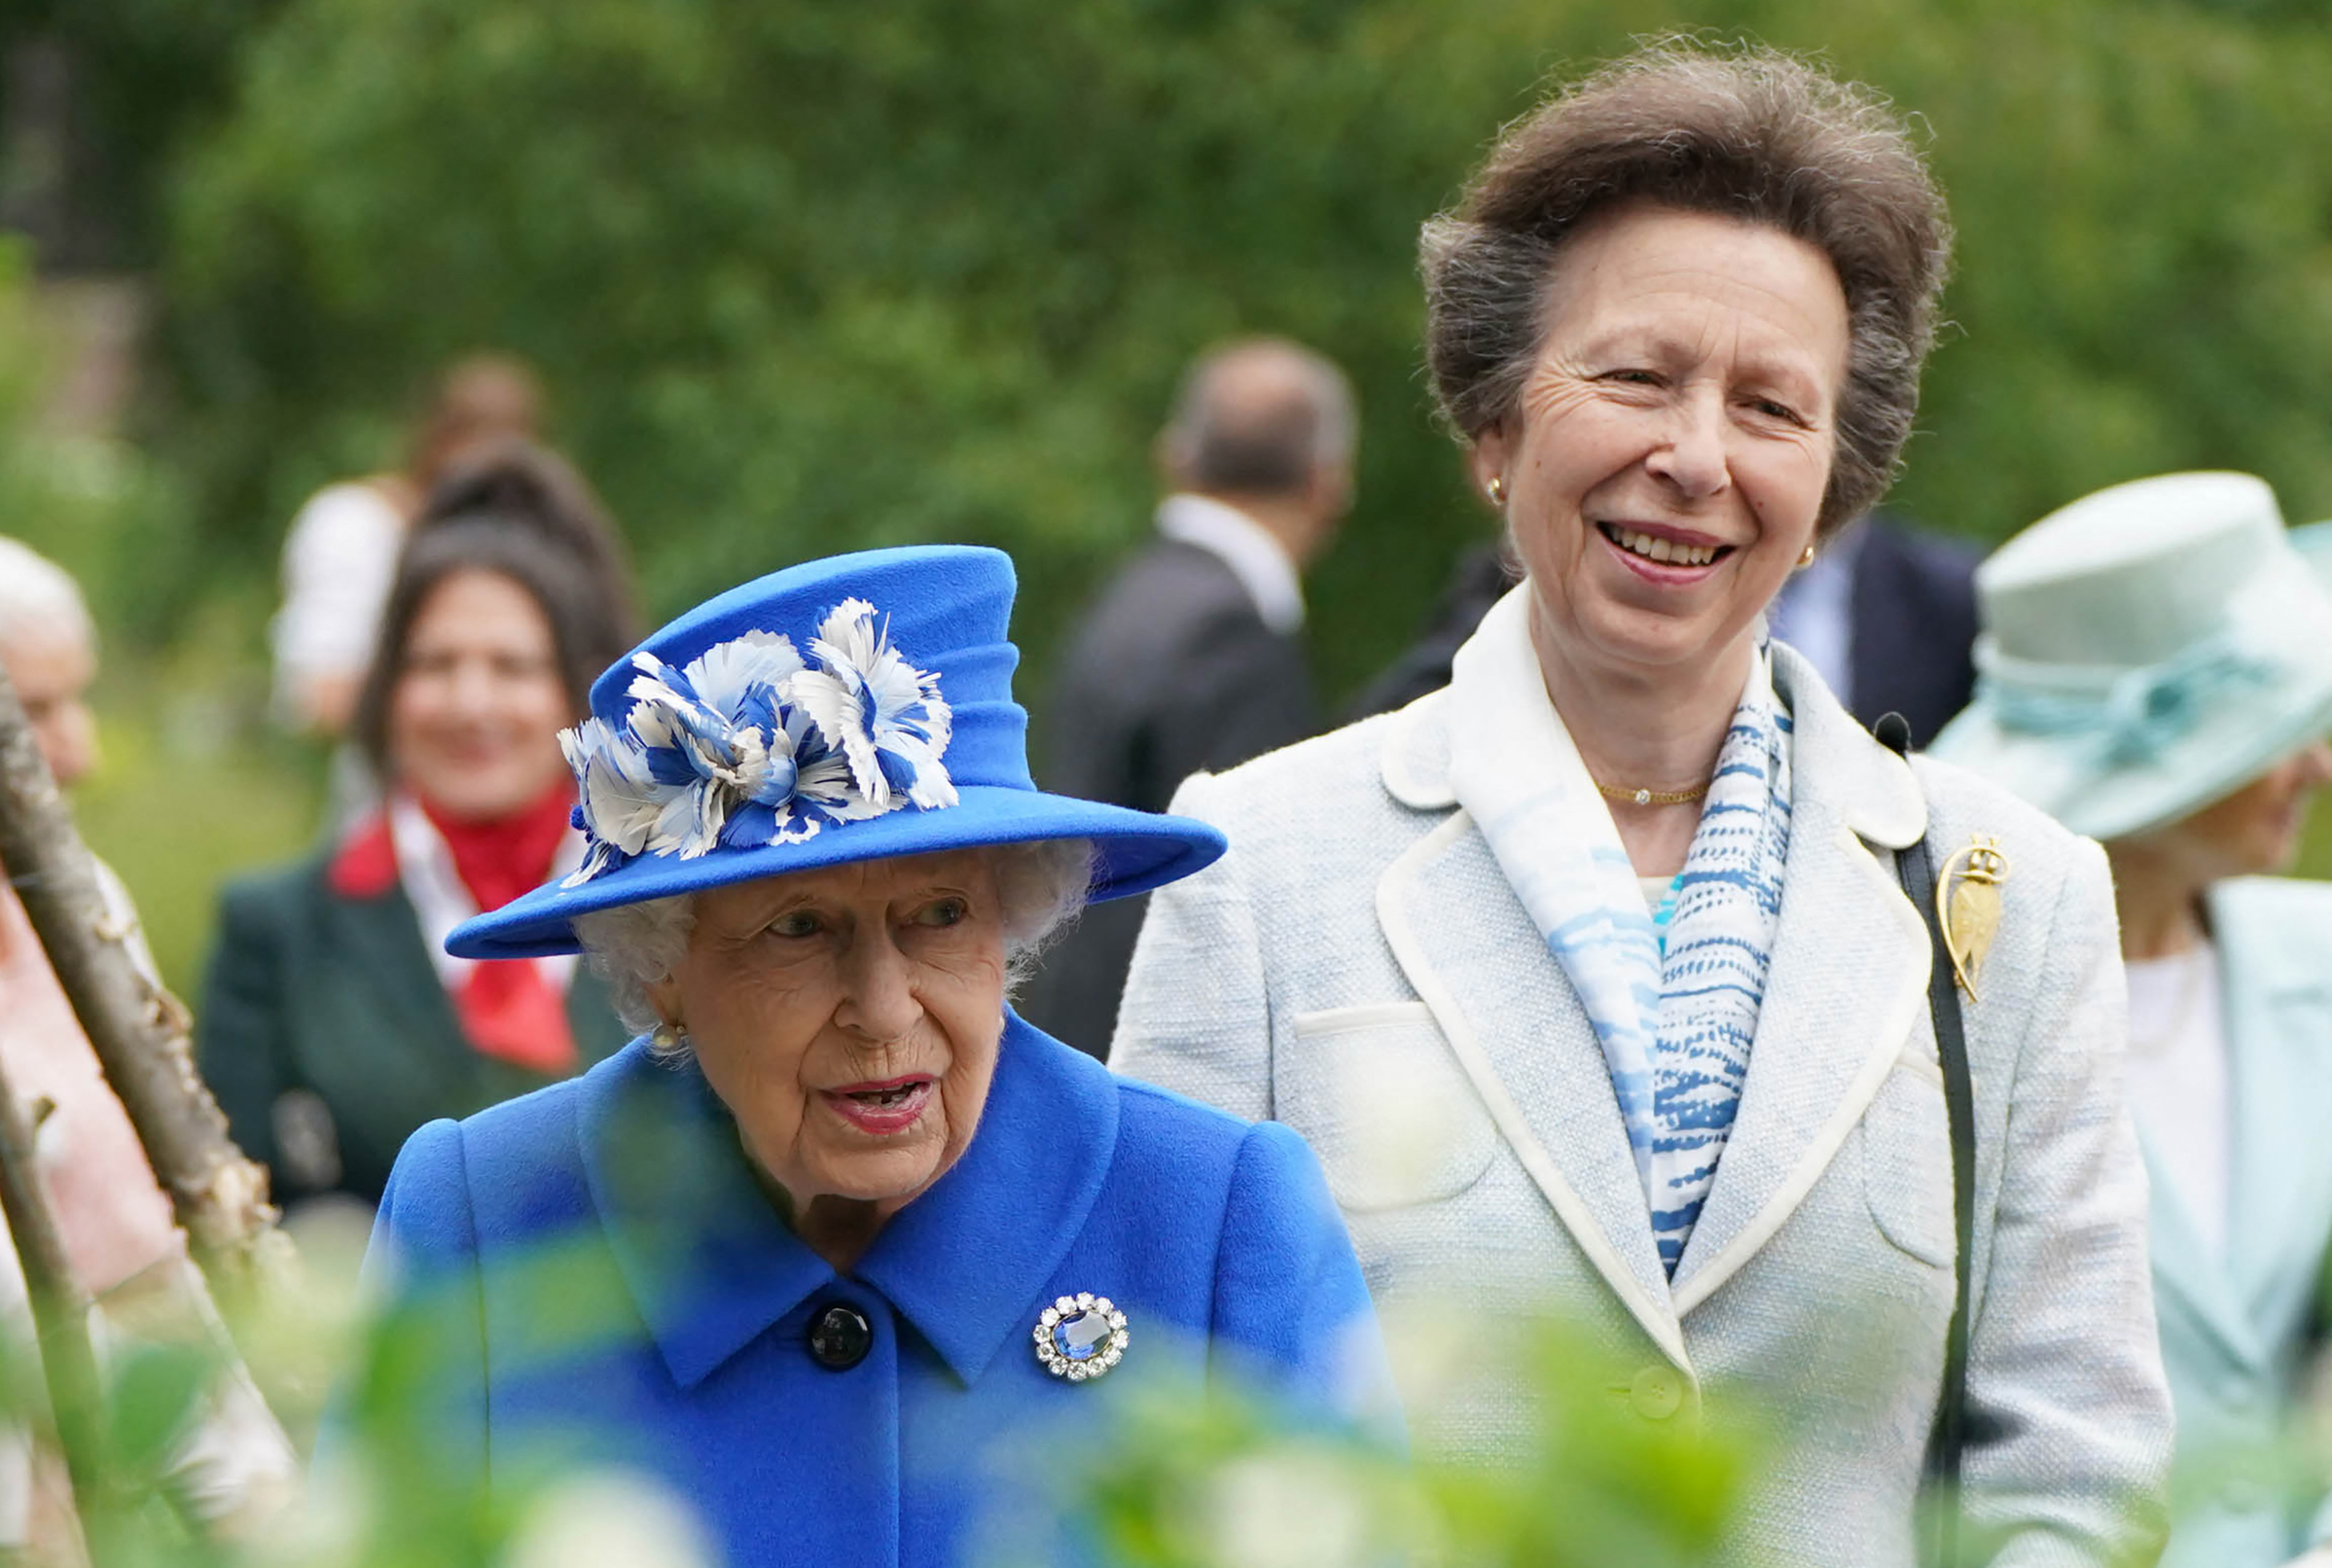 <p>Queen Elizabeth II and daughter Princess Anne, the Princess Royal spent time together during a visit to the Childrens Wood Project in Glasgow, Scotland, on June 30, 2021, as part of the monarch's traditional trip to Scotland for Holyrood Week.</p>